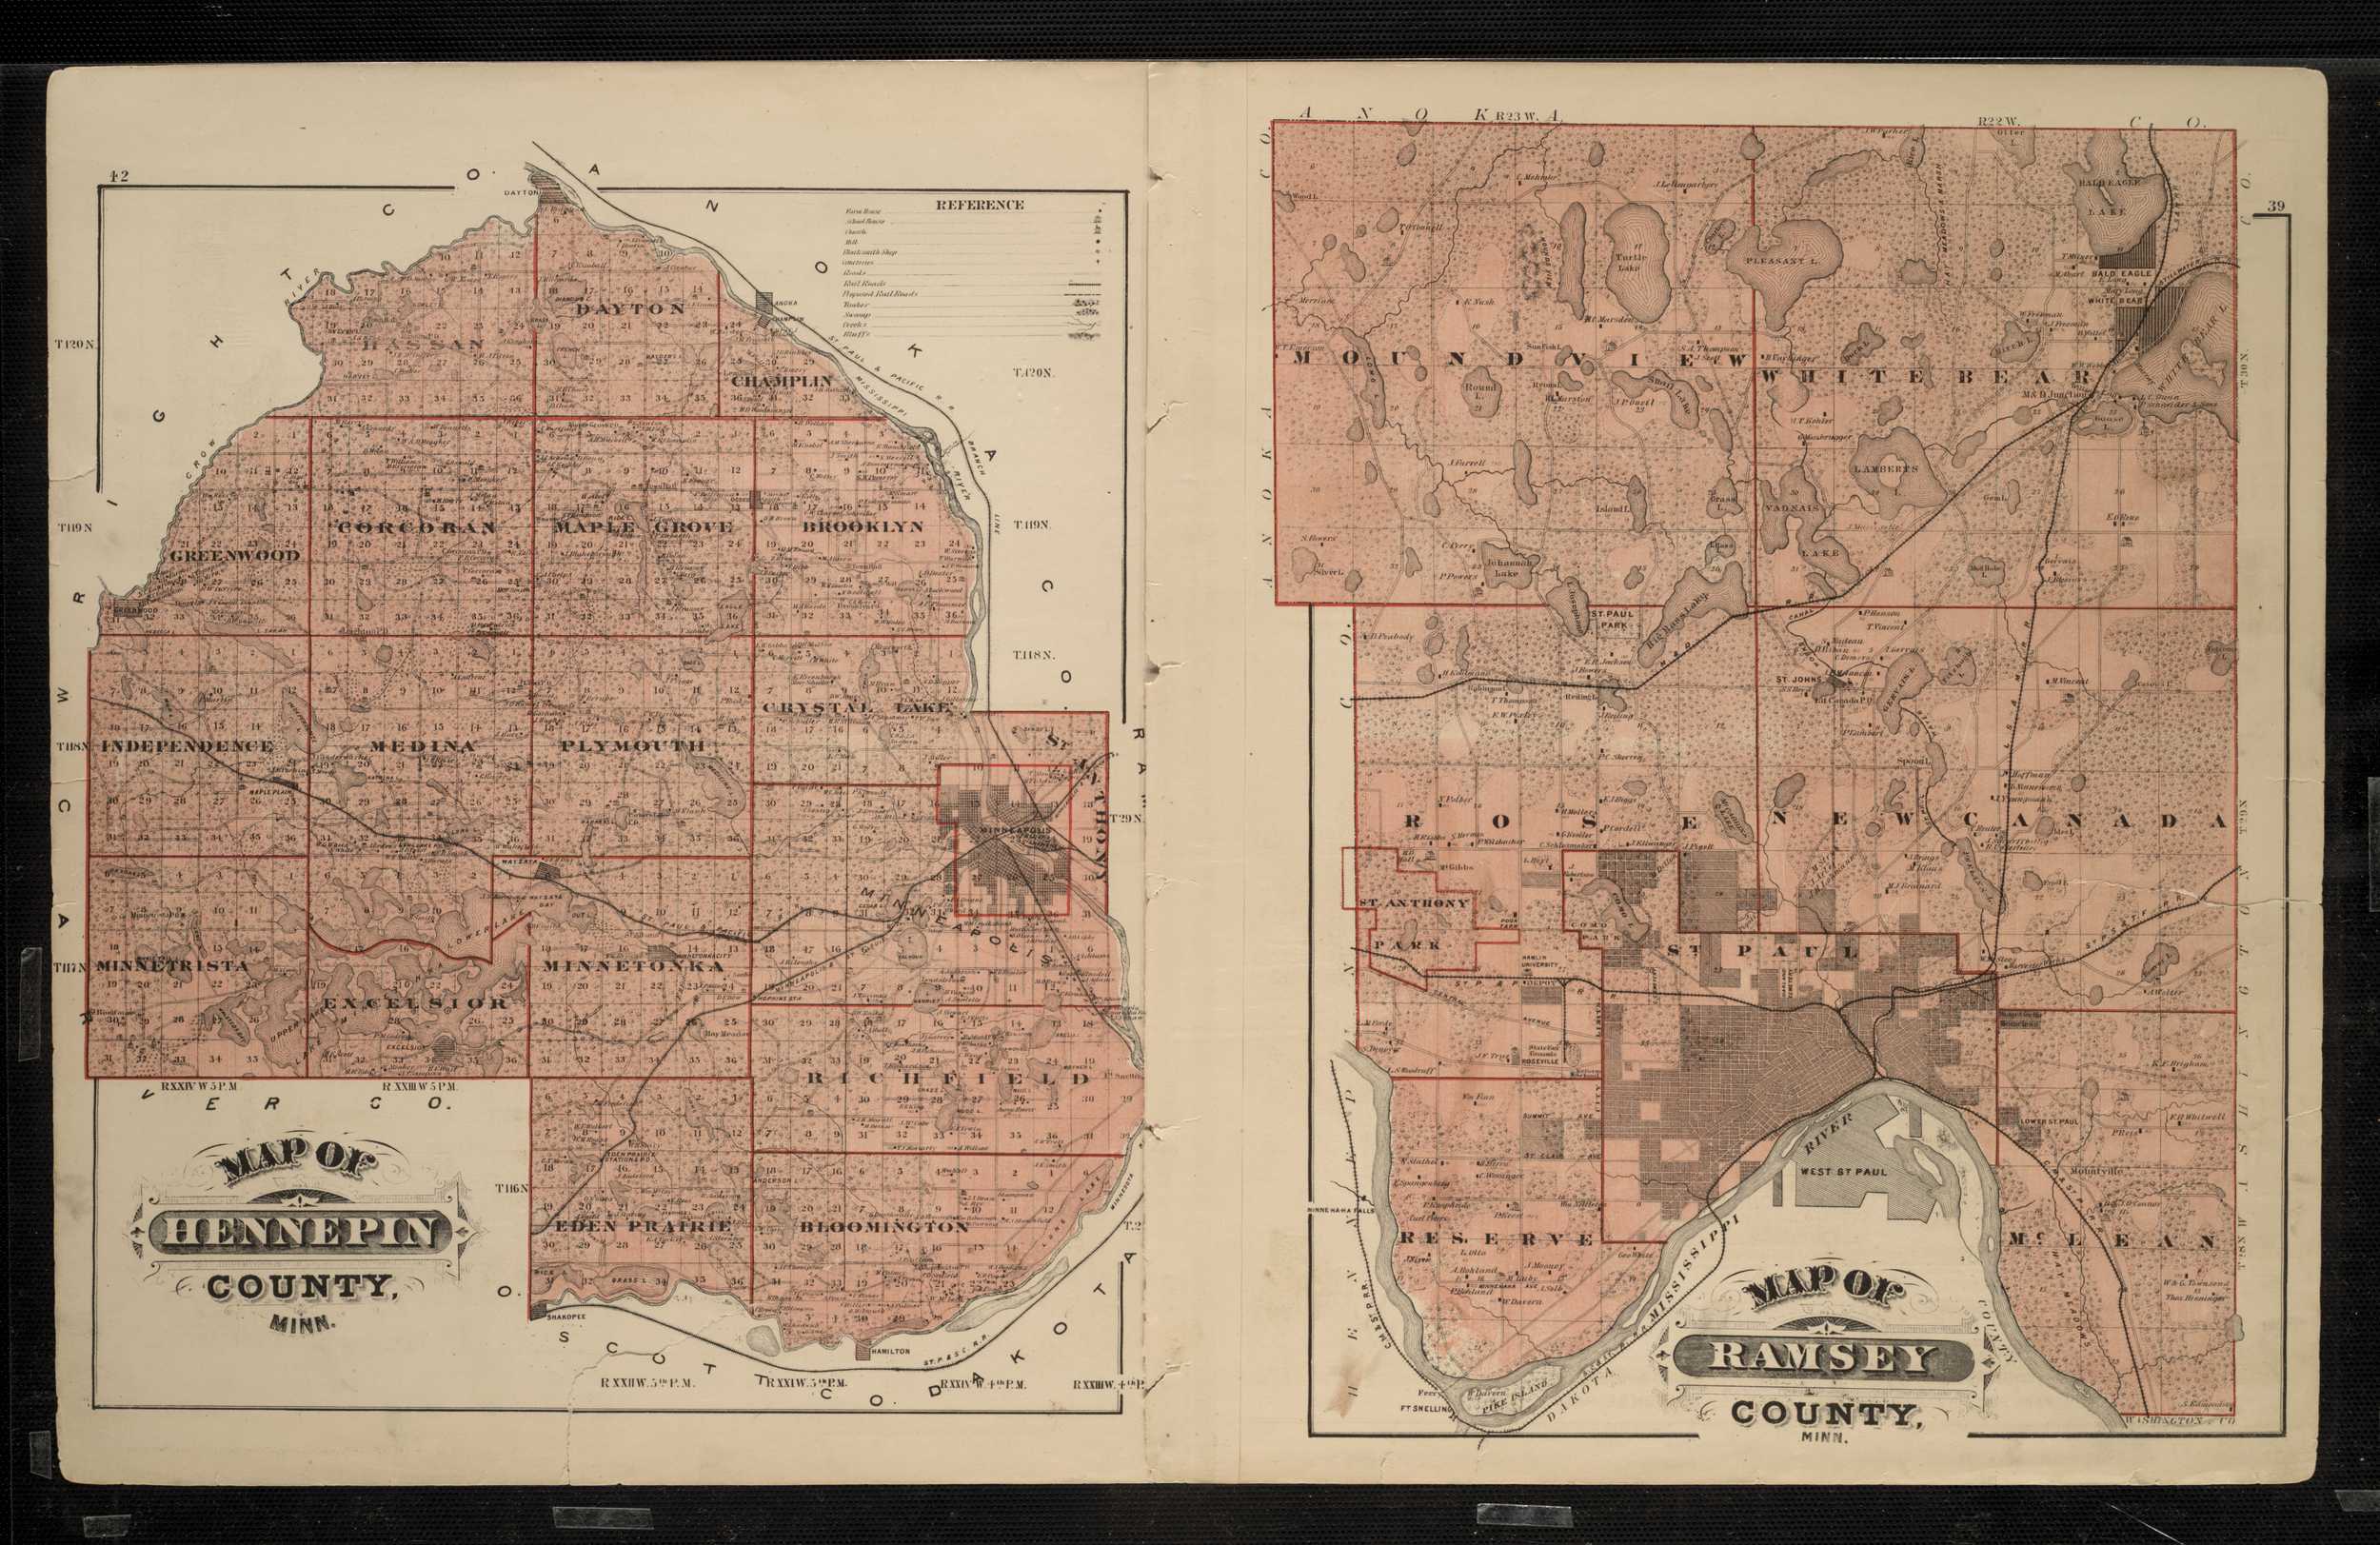 Pine County Gis Interactive Map Digitized Plat Maps And Atlases | University Of Minnesota Libraries